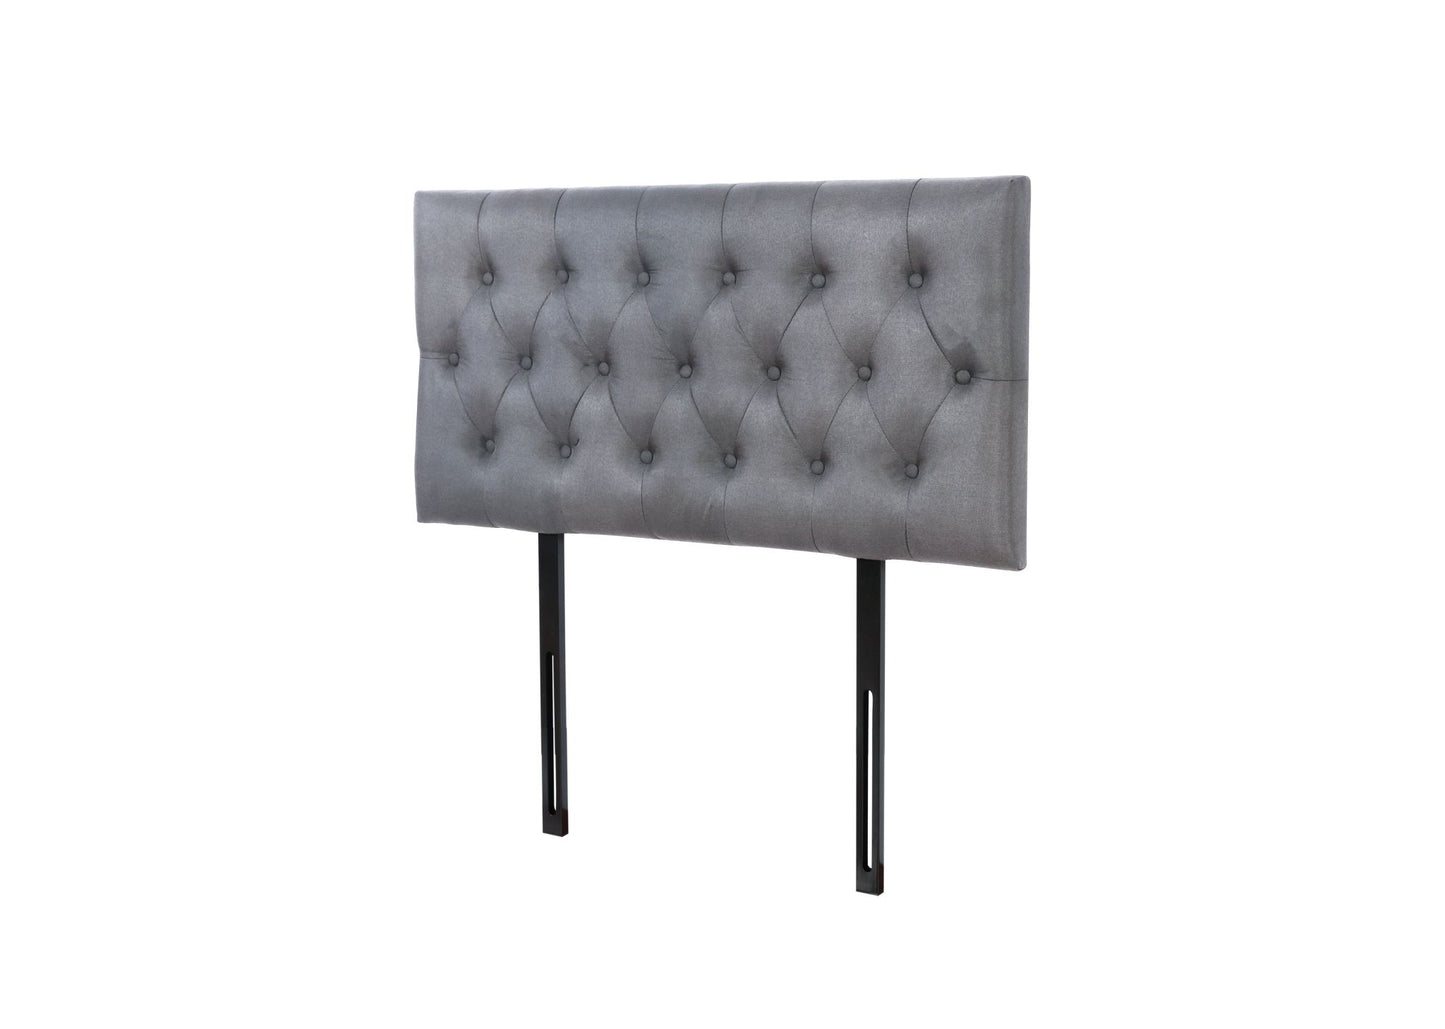 Button Headboard with Metal Legs - Super King - Charcoal